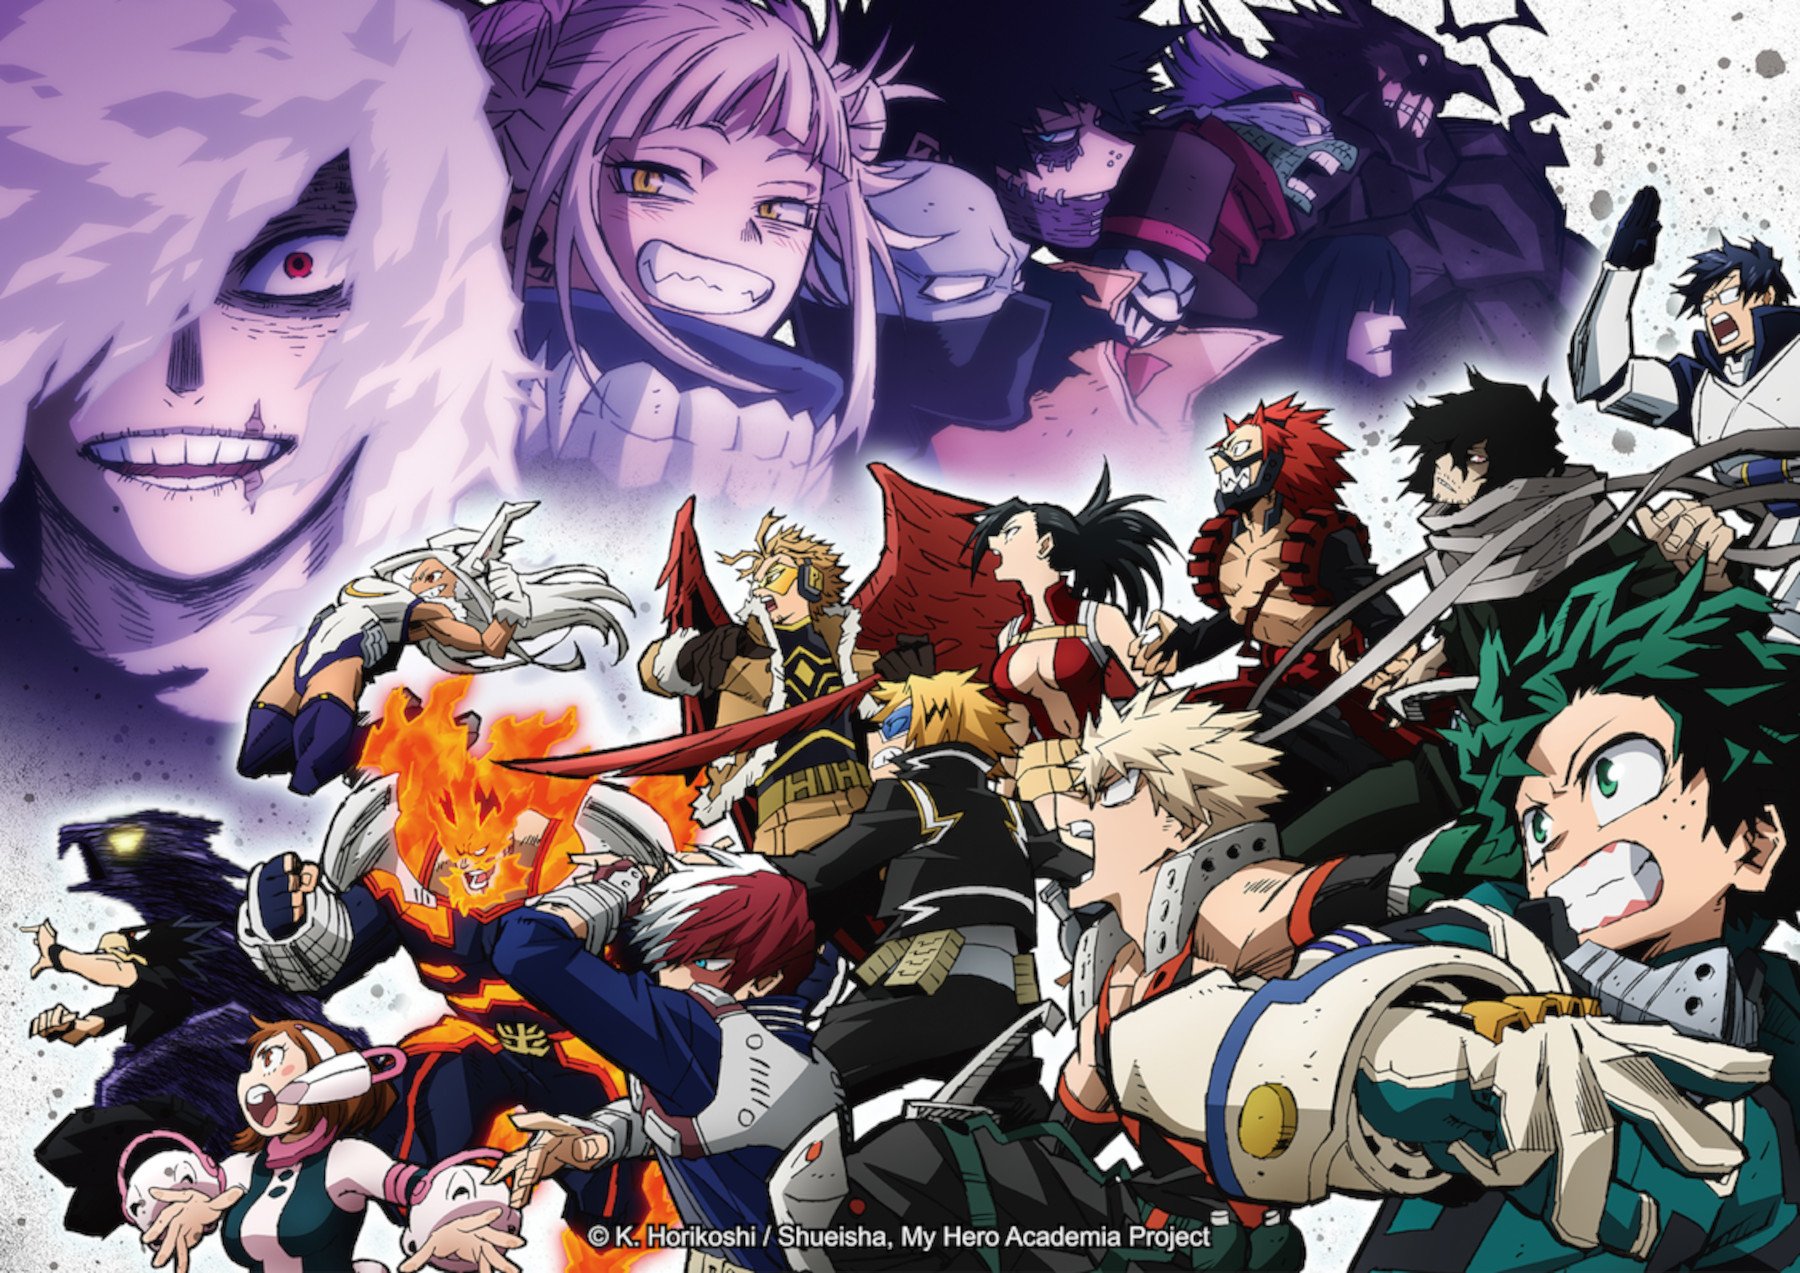 Key art for 'My Hero Academia' Season 6 for our article about whether Twice is dead after episode 3. It features the Pro Heroes ready for a fight, with the villains looming over them.